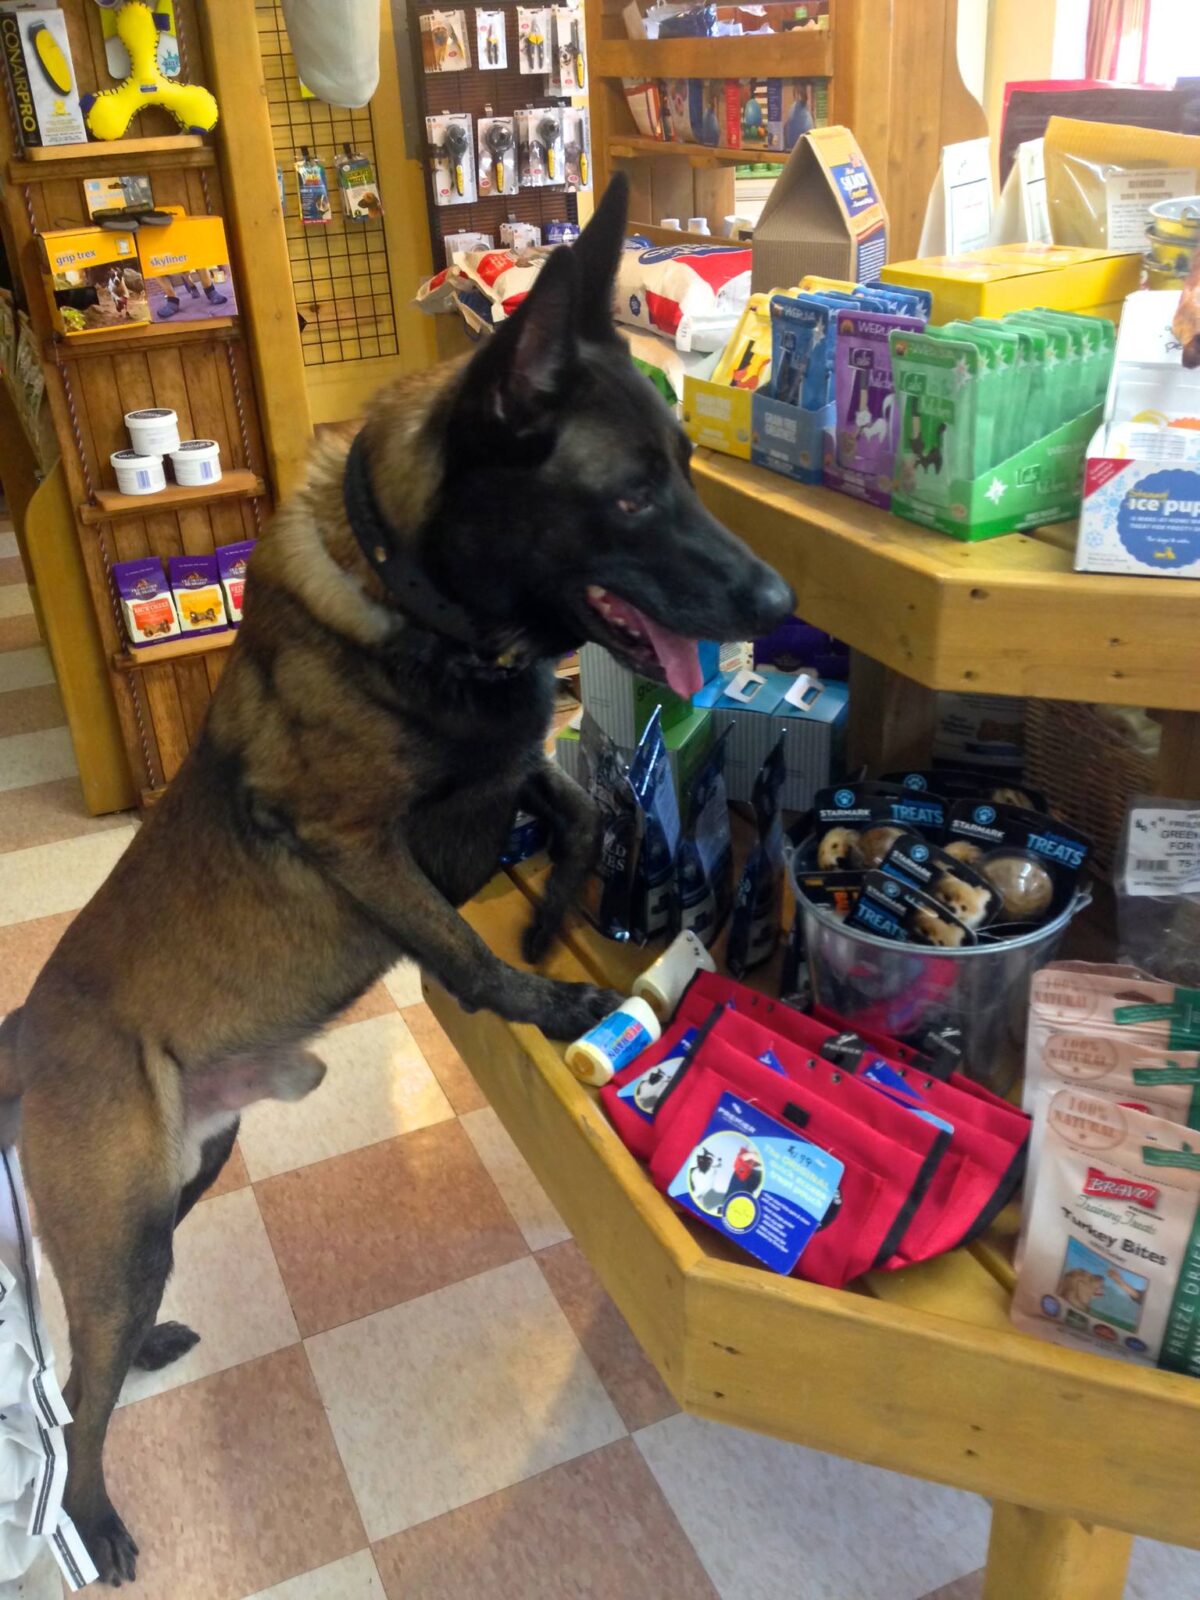 Protection dog happily exploring a pet store filled with pet supplies and toys.